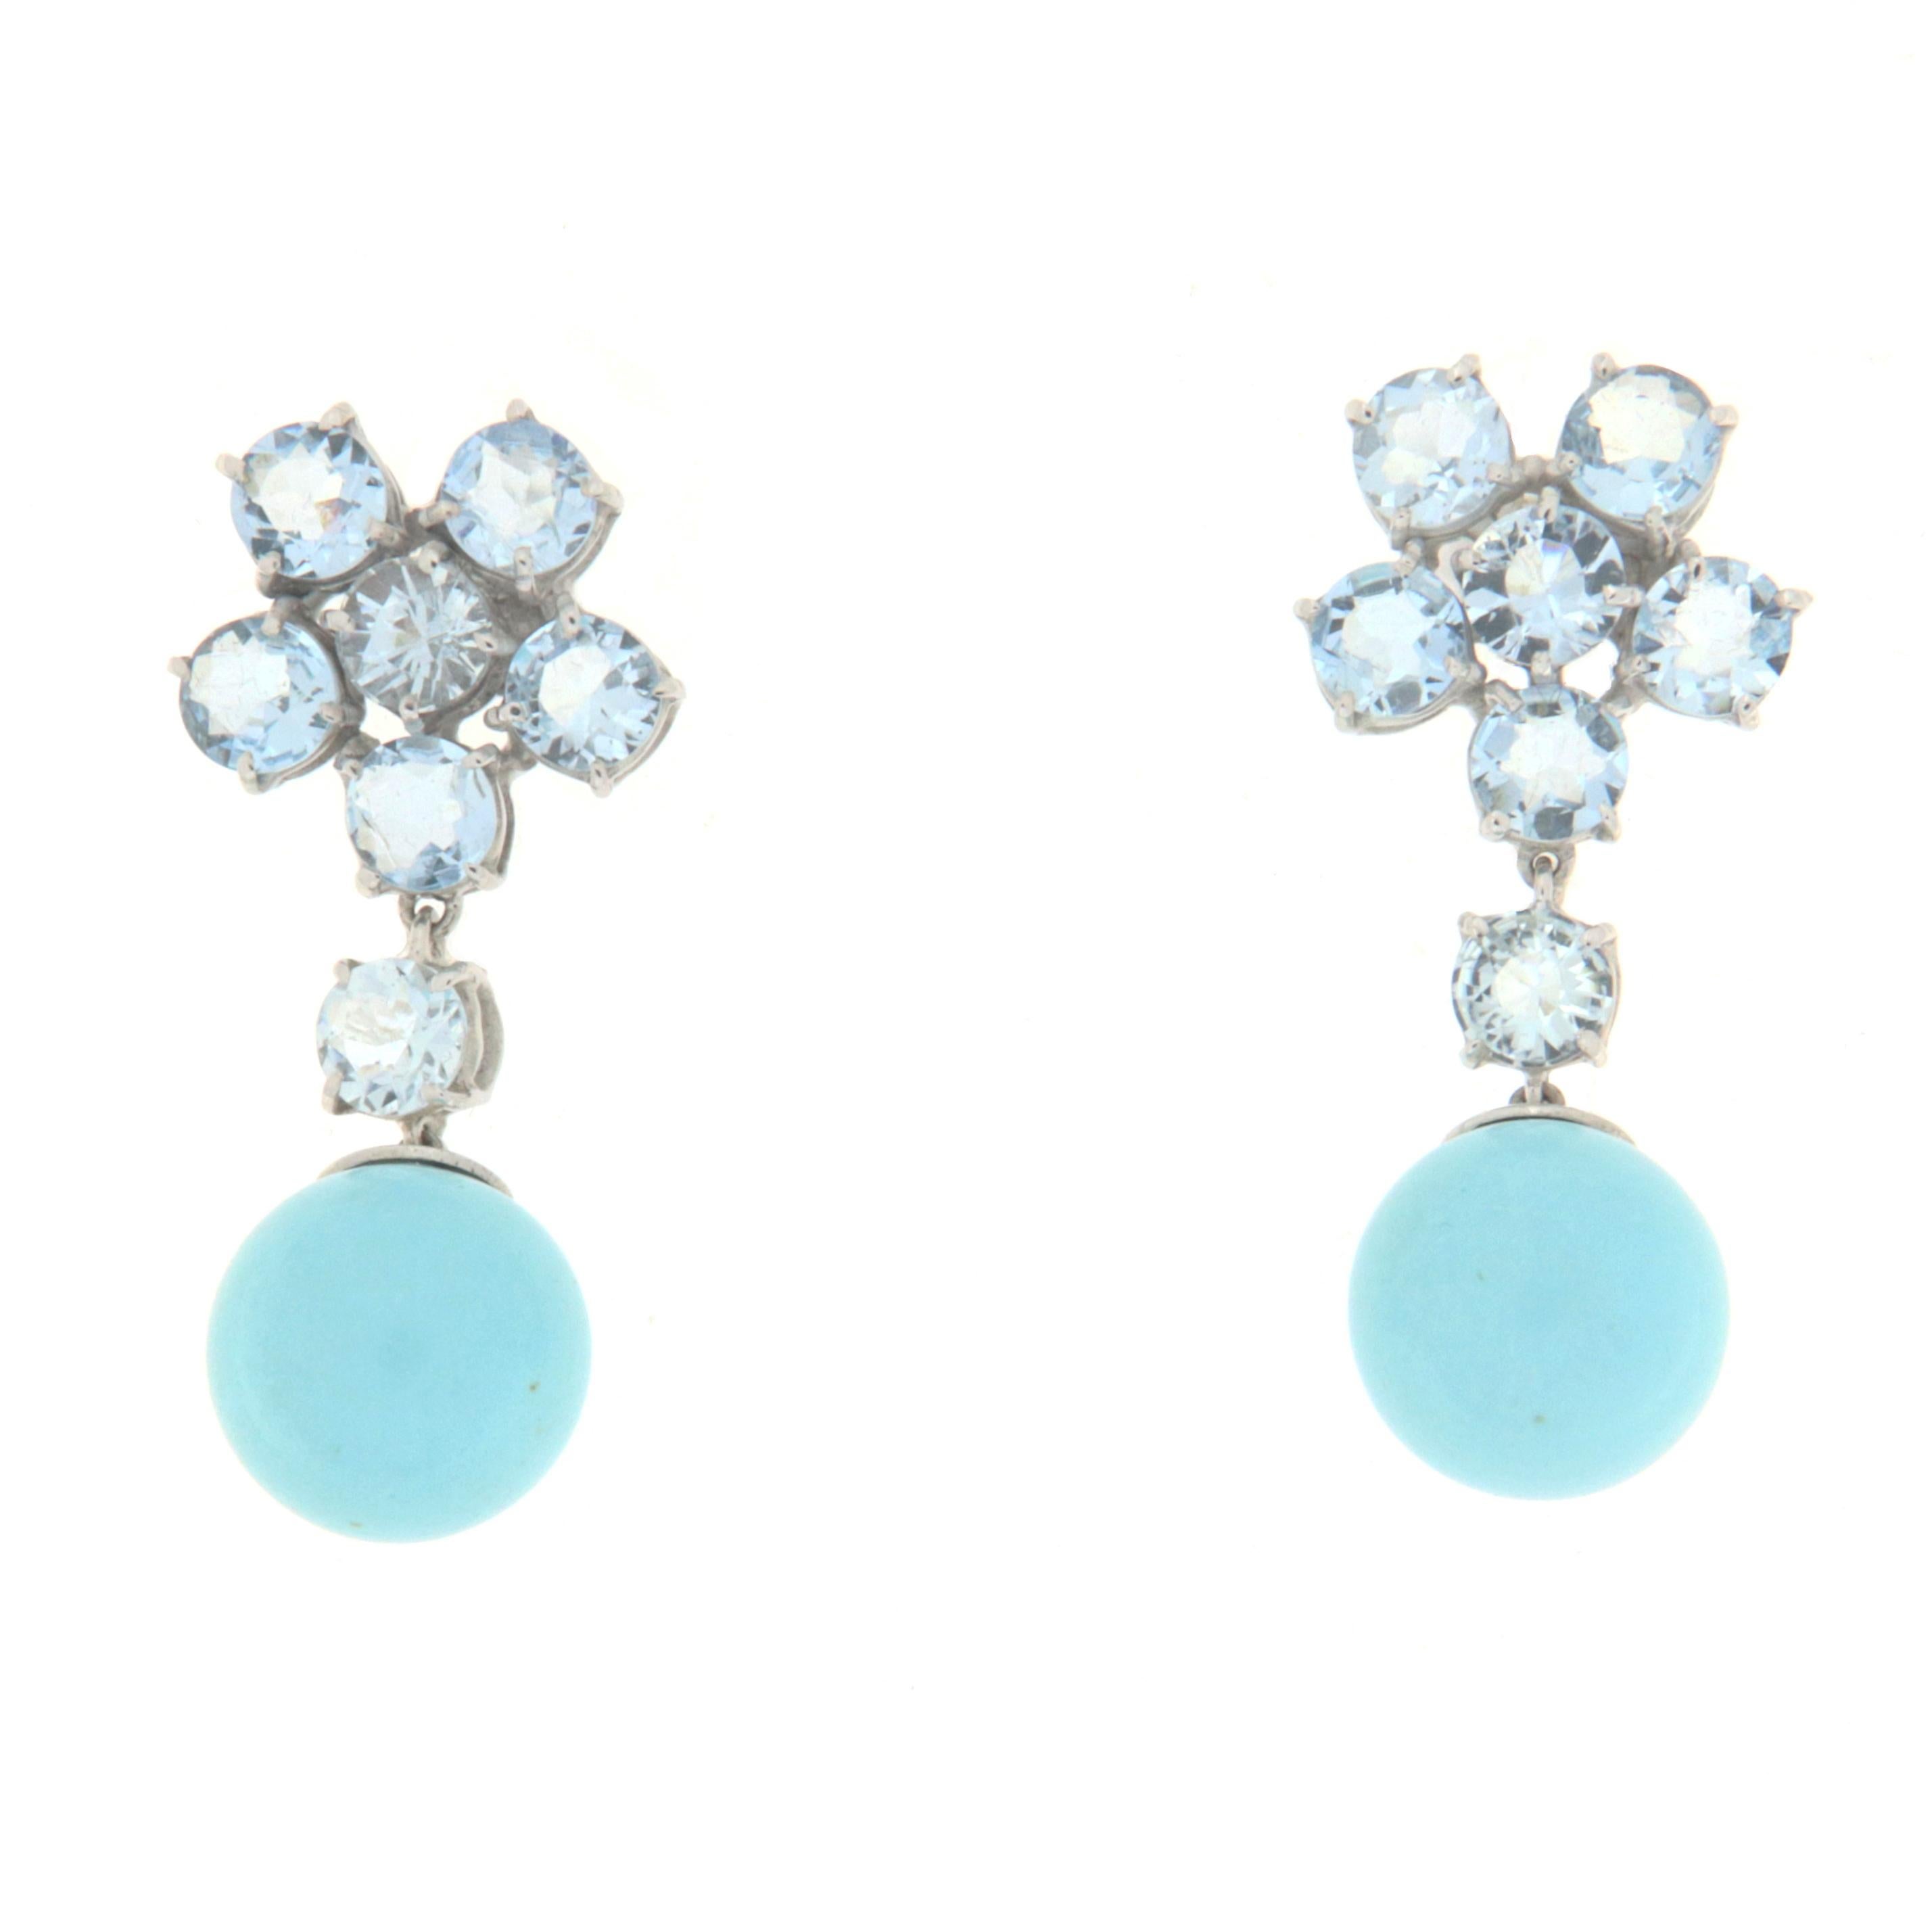 Fantastic earring made entirely by hand by expert master craftsmen. There are two sphere turquoise and aquamarines . Made of 18 Karat white gold.
An earring to be exhibited on any occasion, simple but at the same time very impactful, in short, a